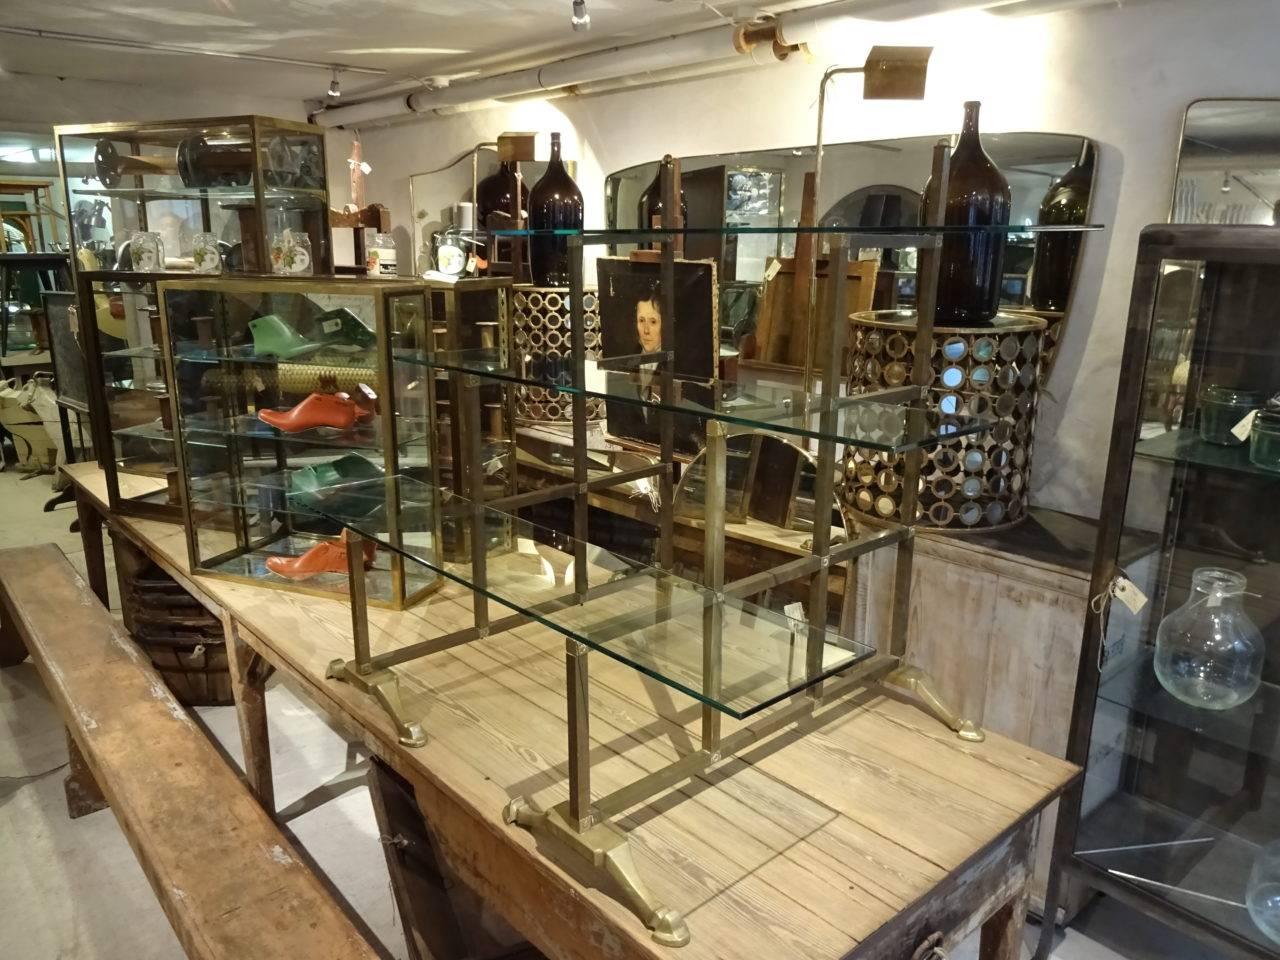 Lovely Italian solid brass ètagère, previously part of a Milanese shoe boutique’s inventory. The display unit has three thick glass shelves and wonderful gilt metal feet. Super floral decorations on the framework. Perfect display furnishing for your